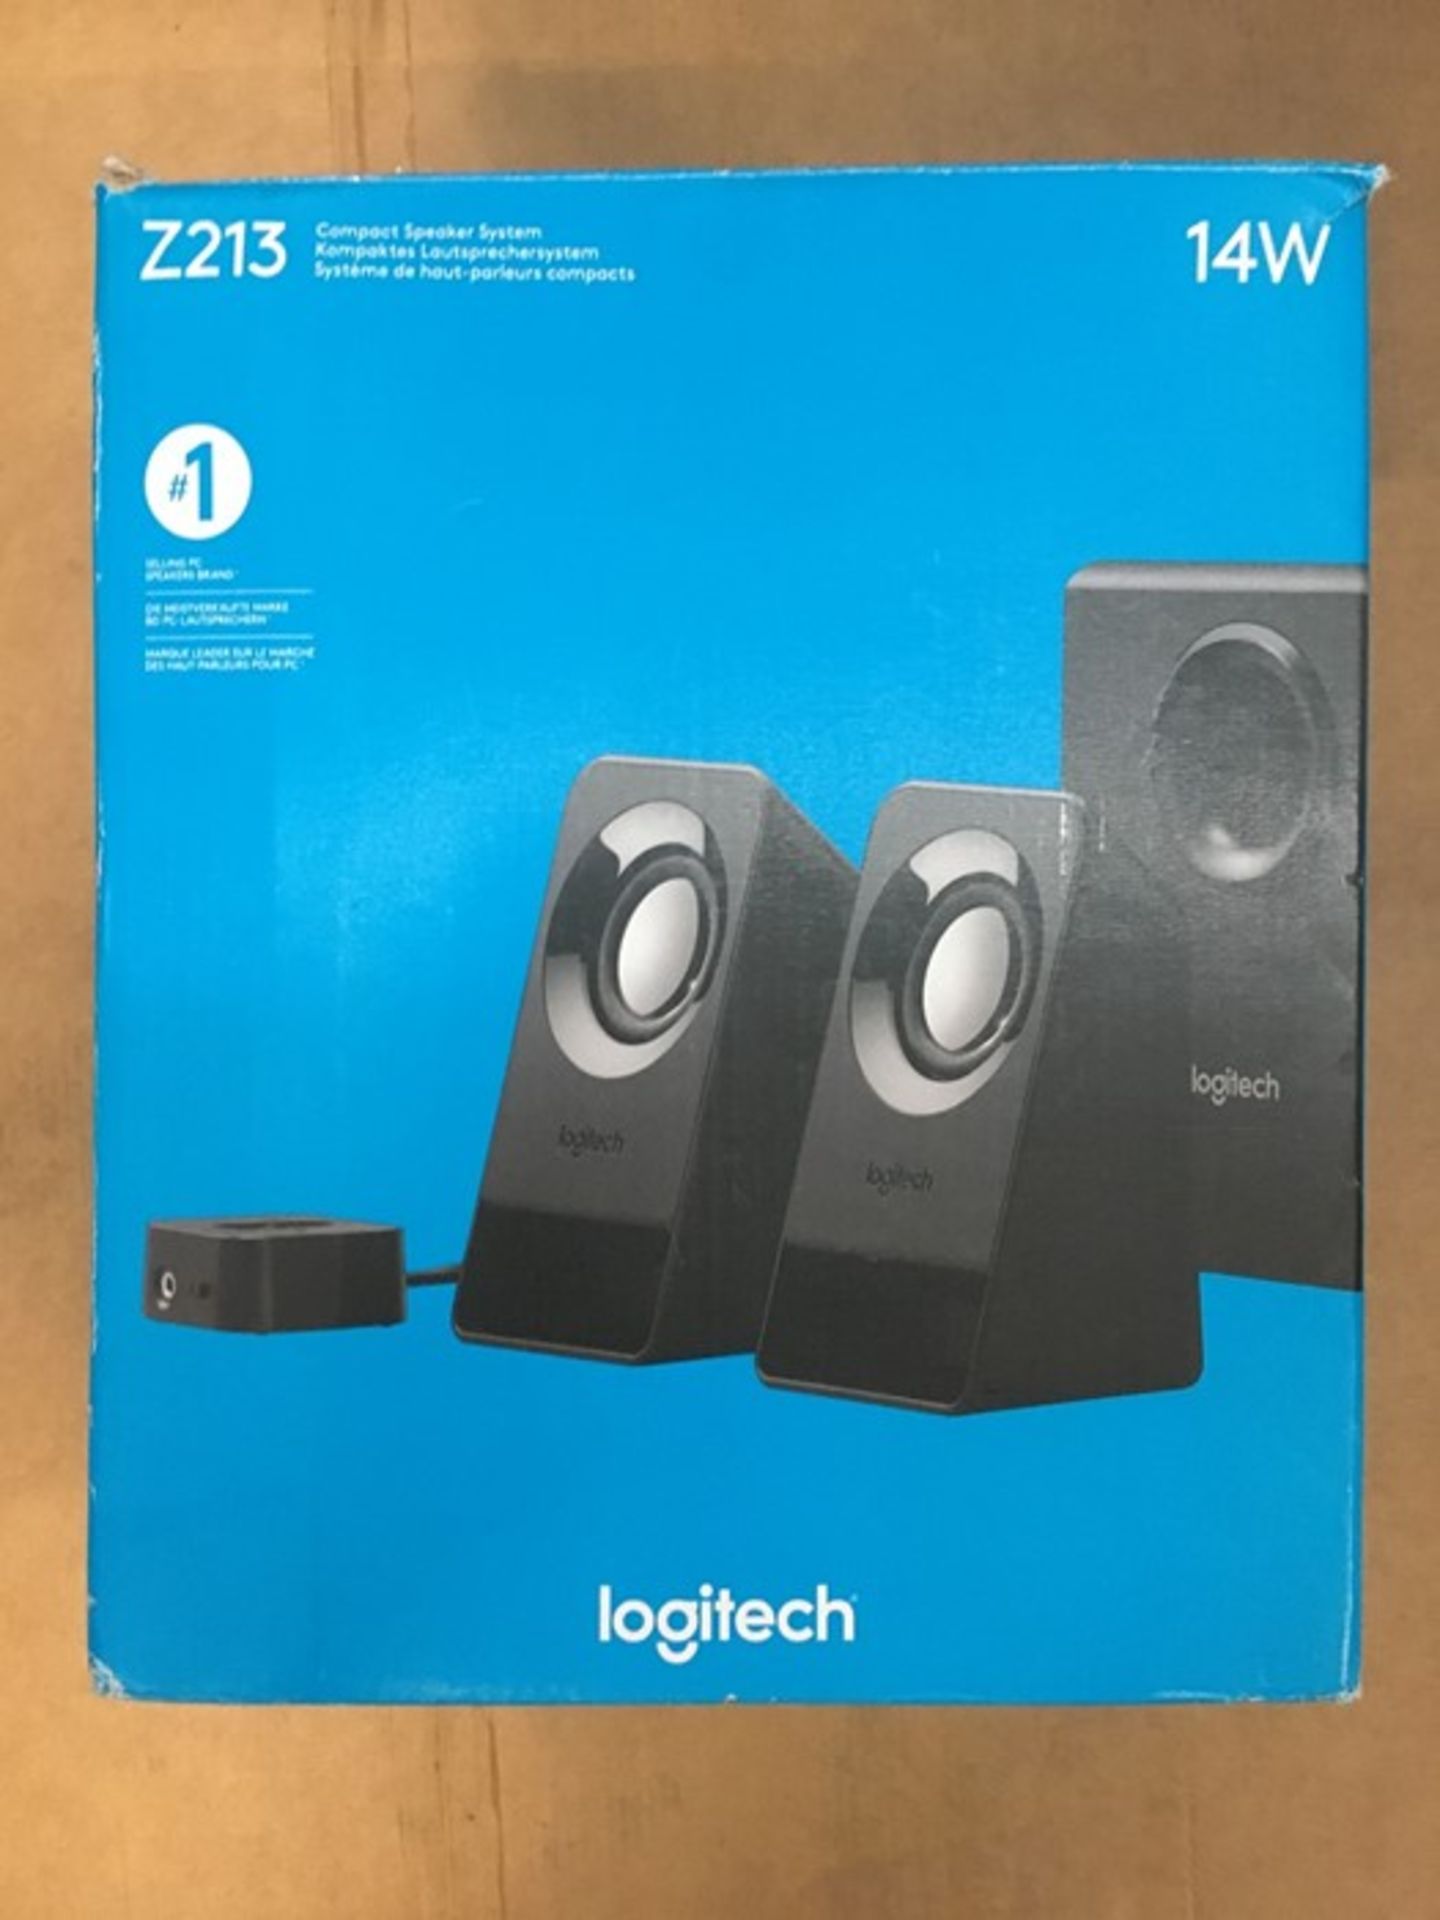 1 BOXED AND UNTESTED LOGITECH COMPACT SPEAKER SYSTEM Z213 / RRP £34.99 / BL - 7812 (PUBLIC VIEWING